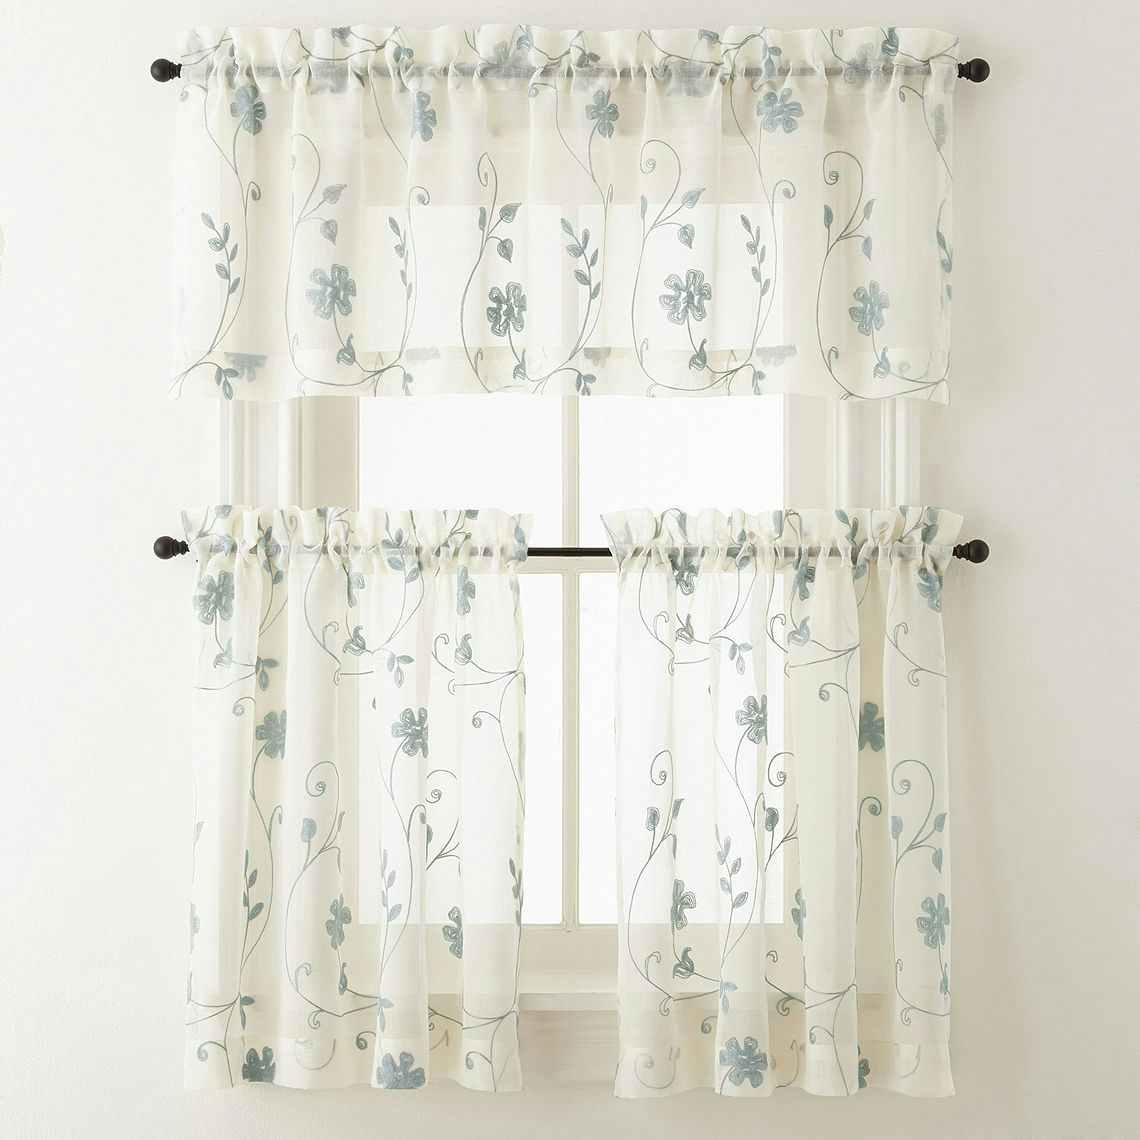 Tiered sheer window curtains